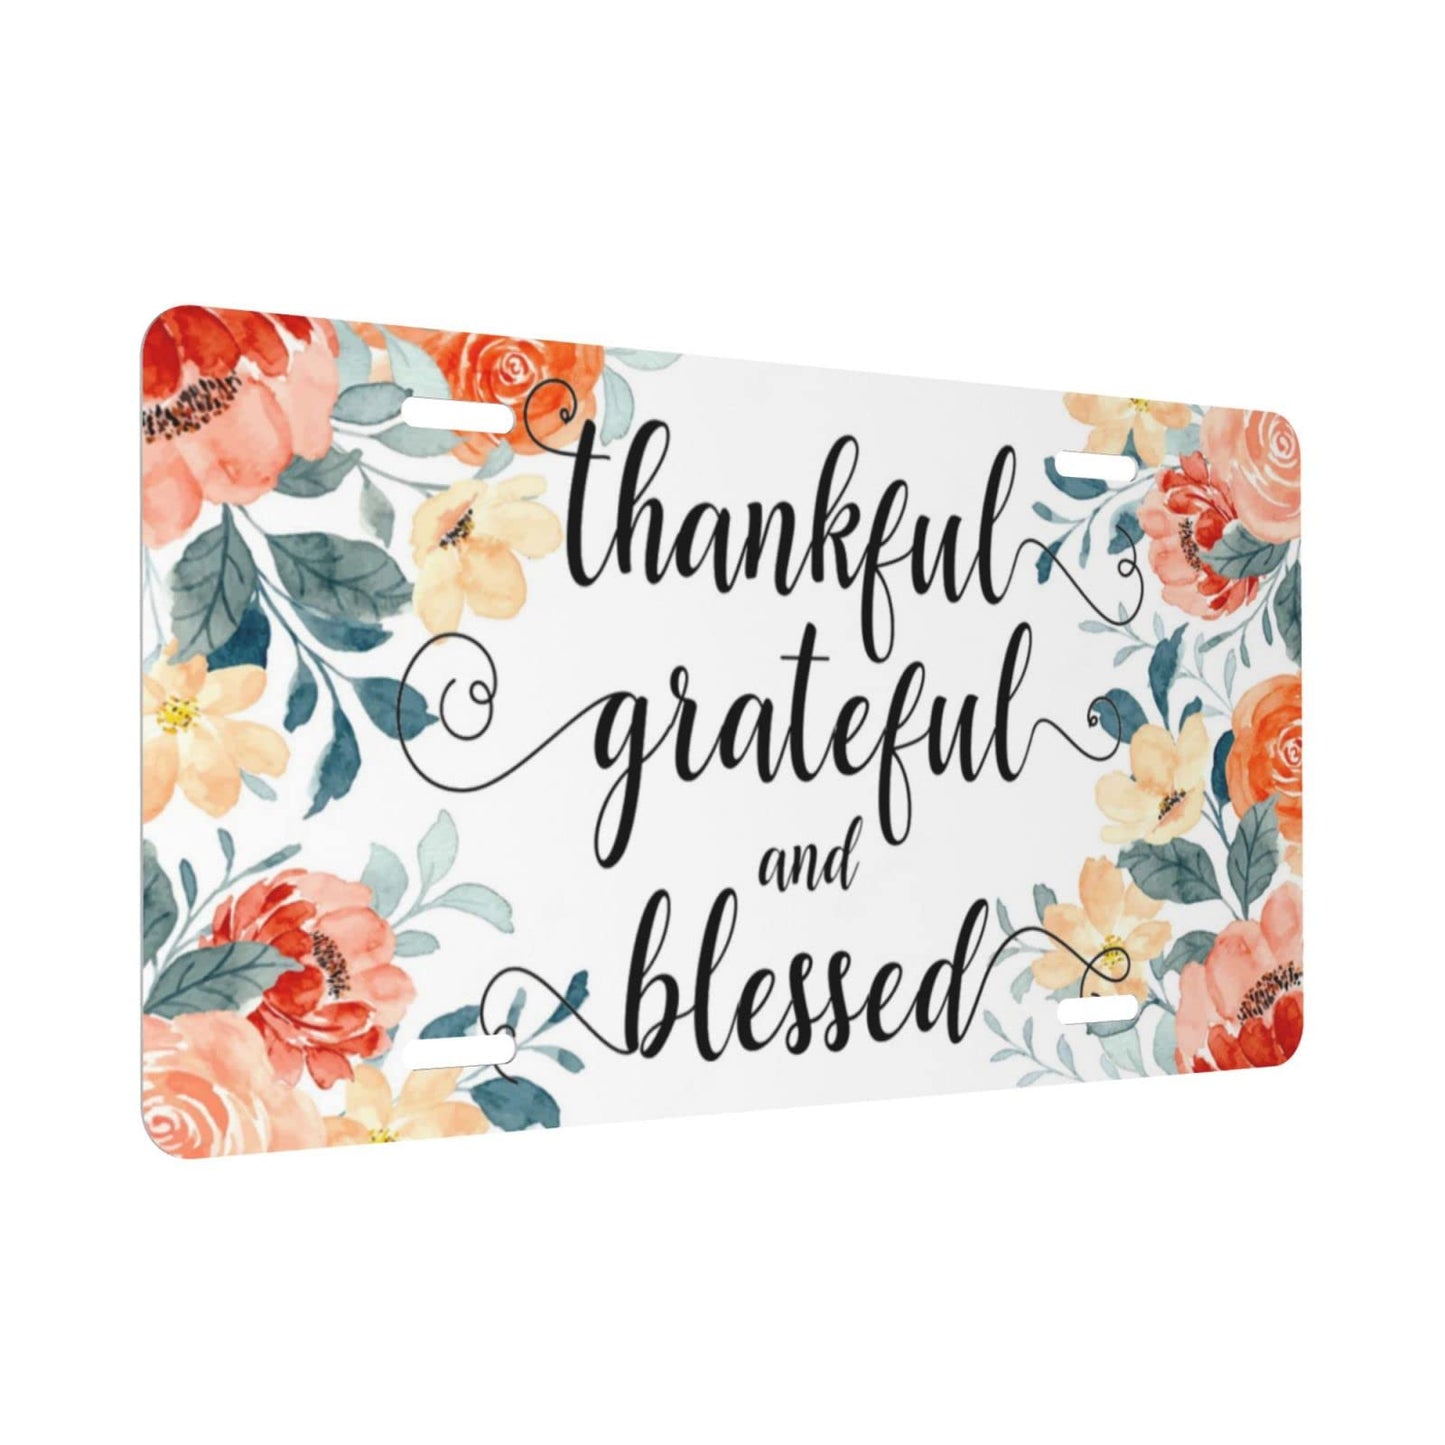 Grateful Thankful Blessed Christian Front License Plate 6x12inch claimedbygoddesigns